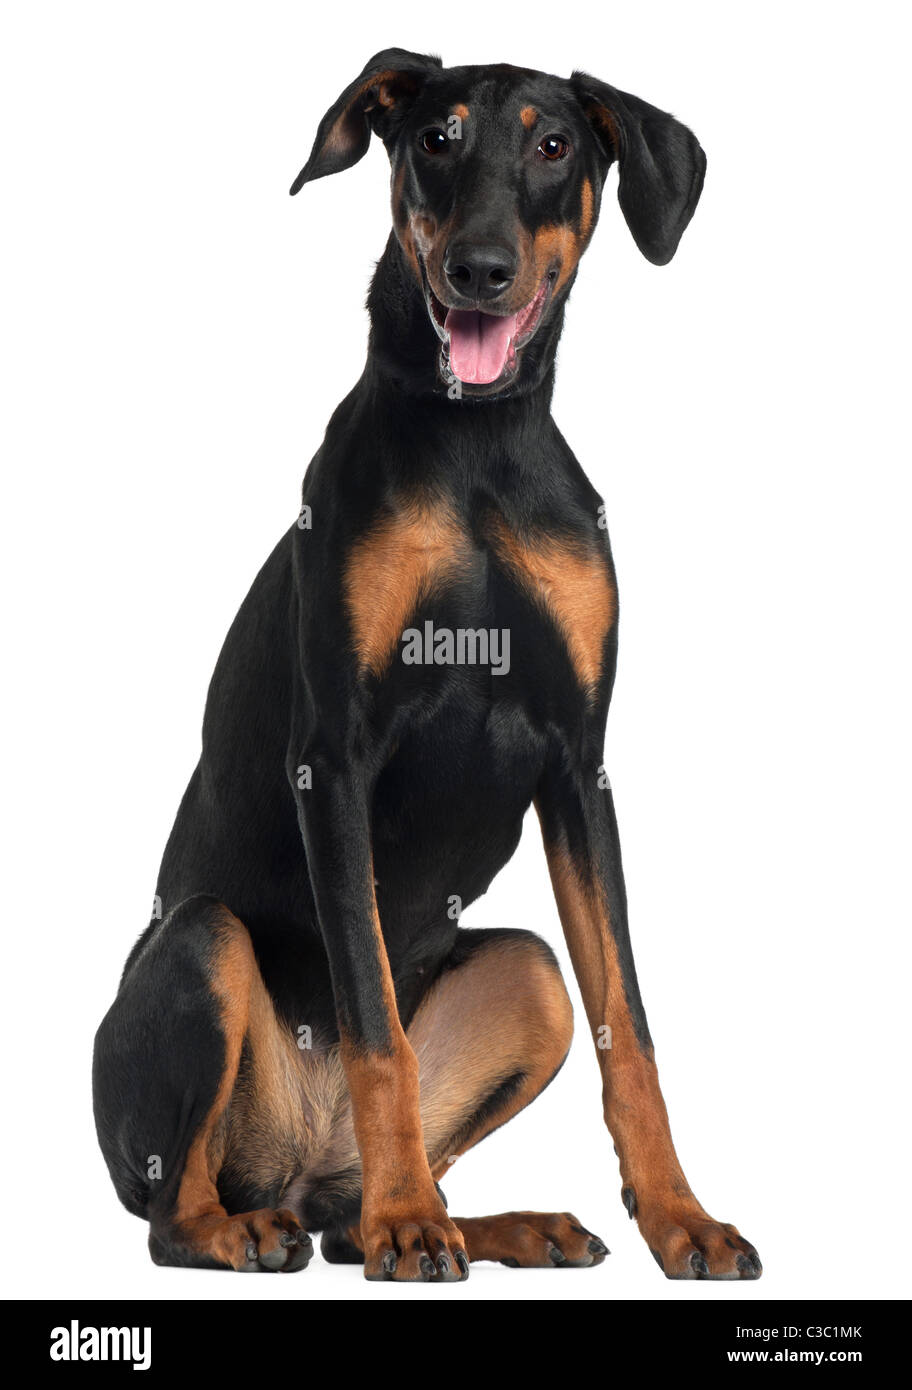 Doberman Pinscher, 8 and a half months old, sitting in front of white background Stock Photo